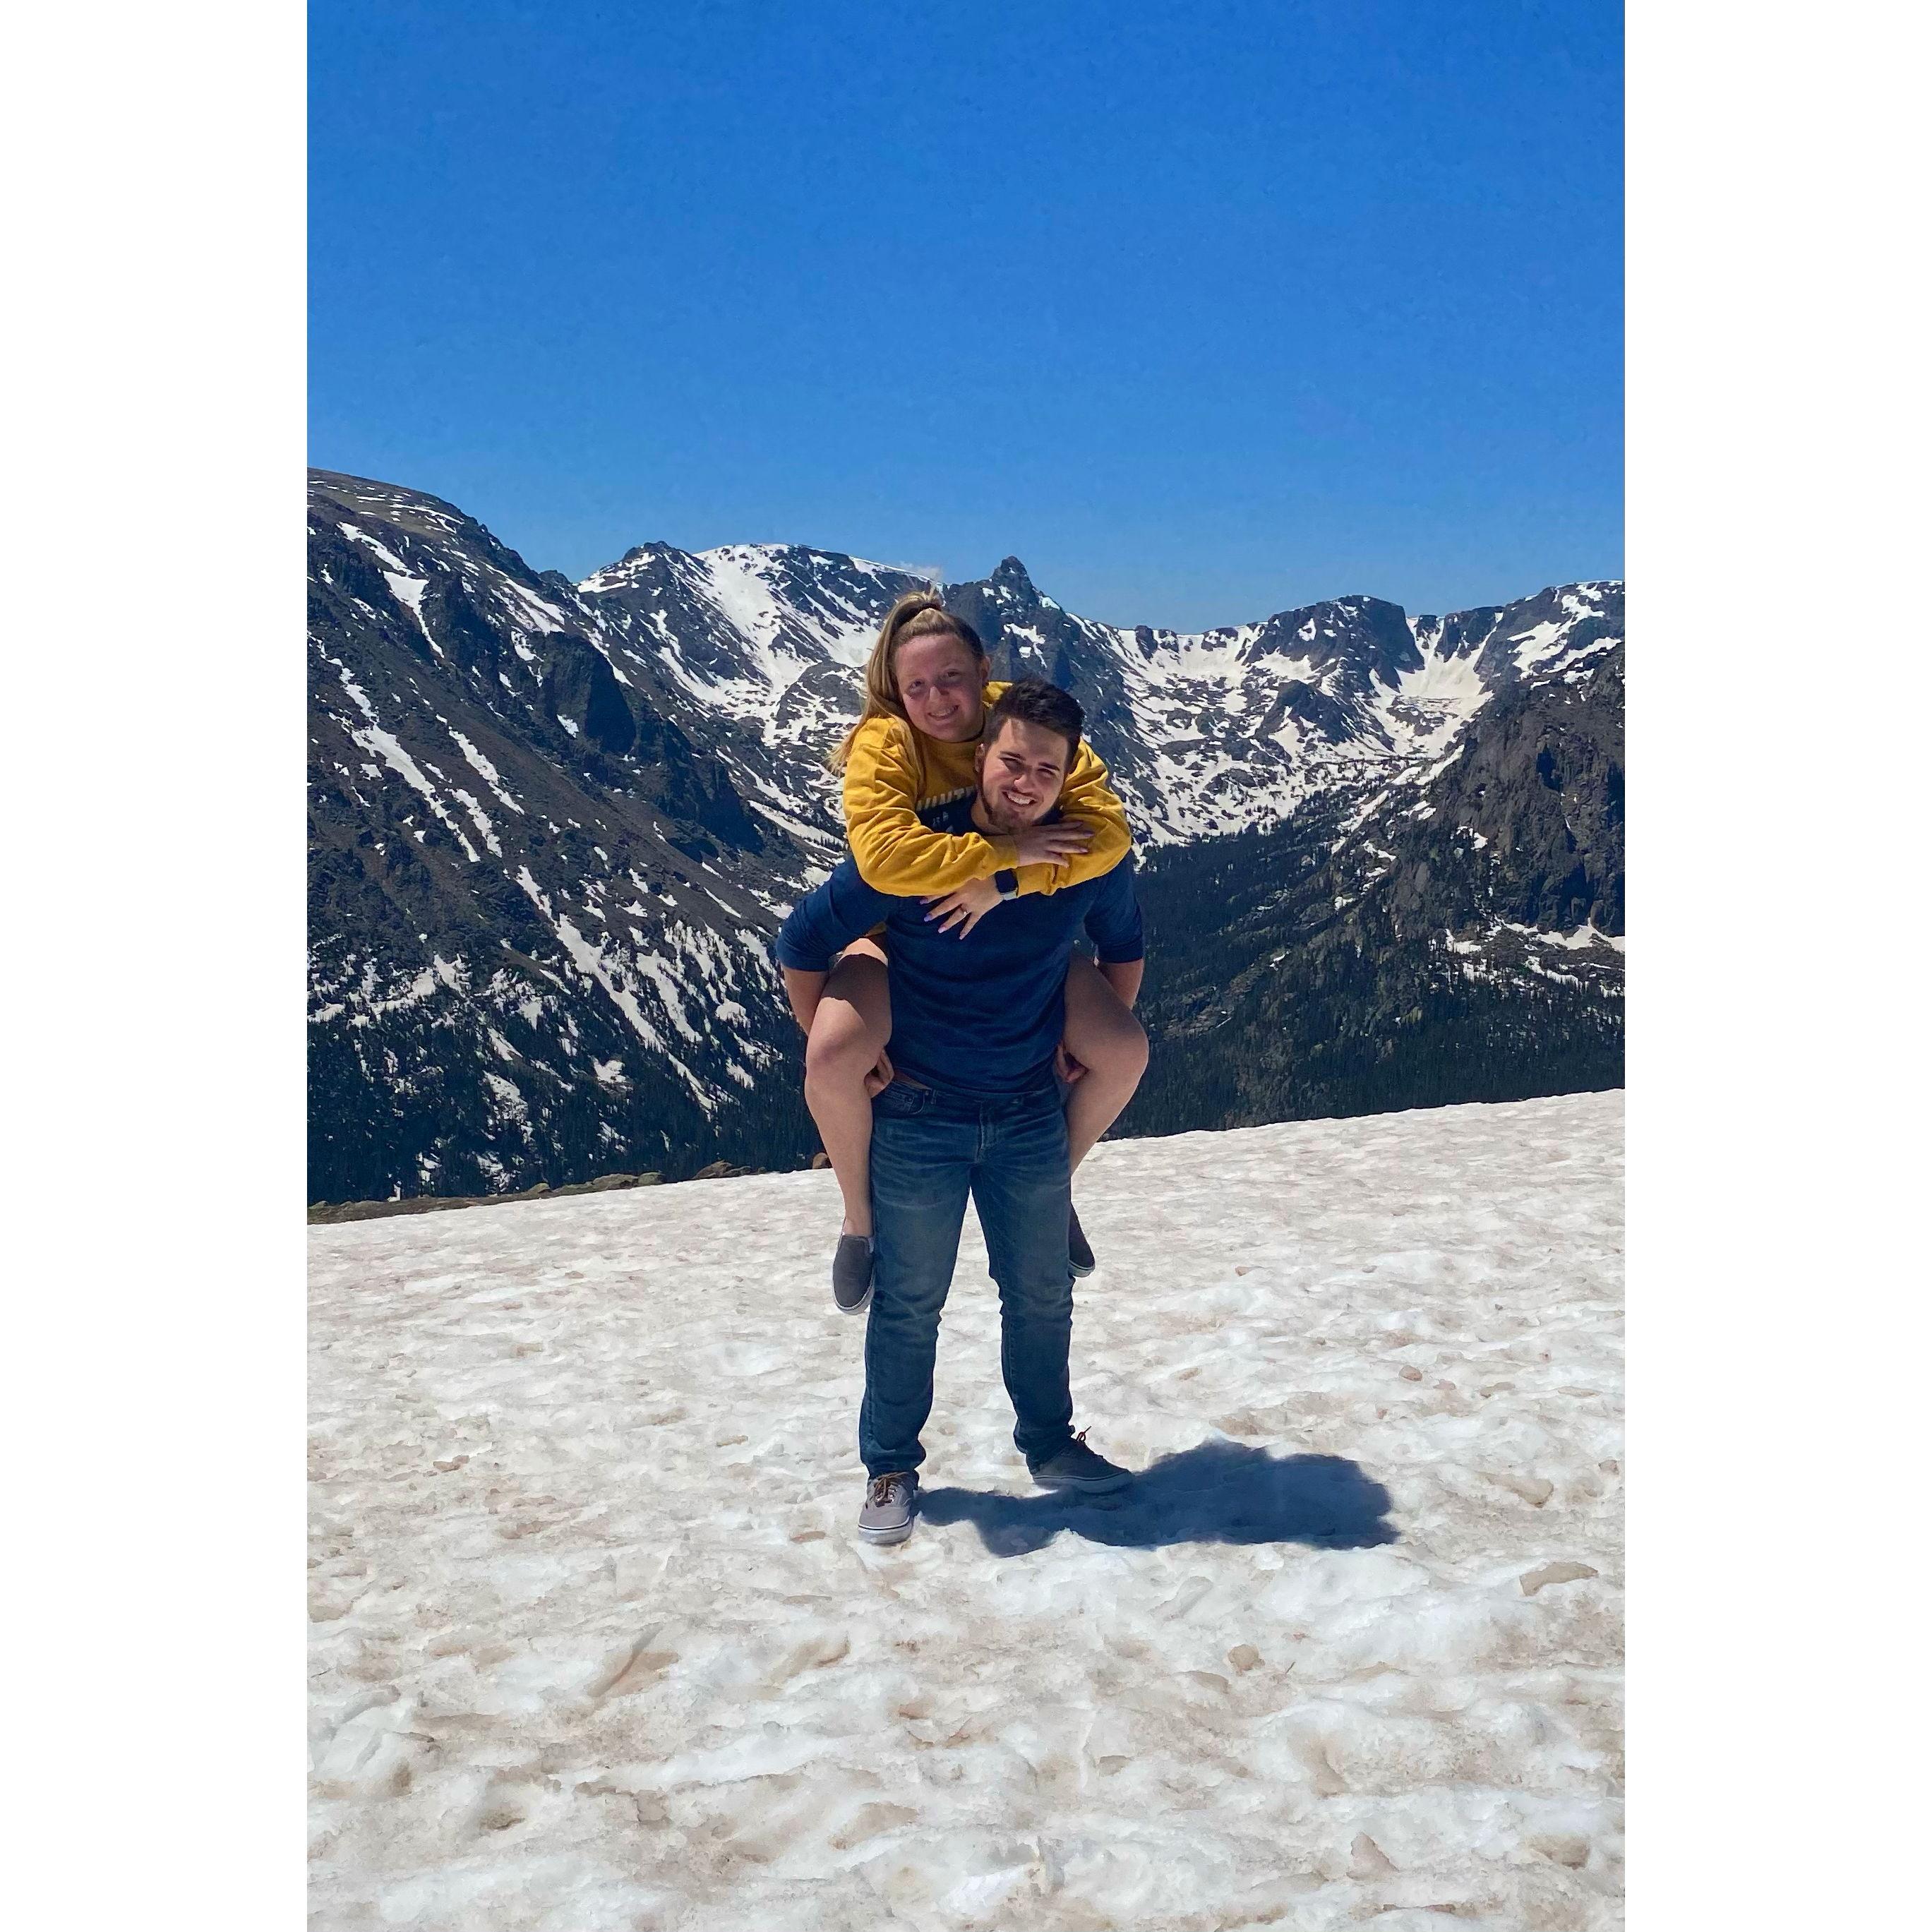 Grace & Michael's first trip to Colorado!